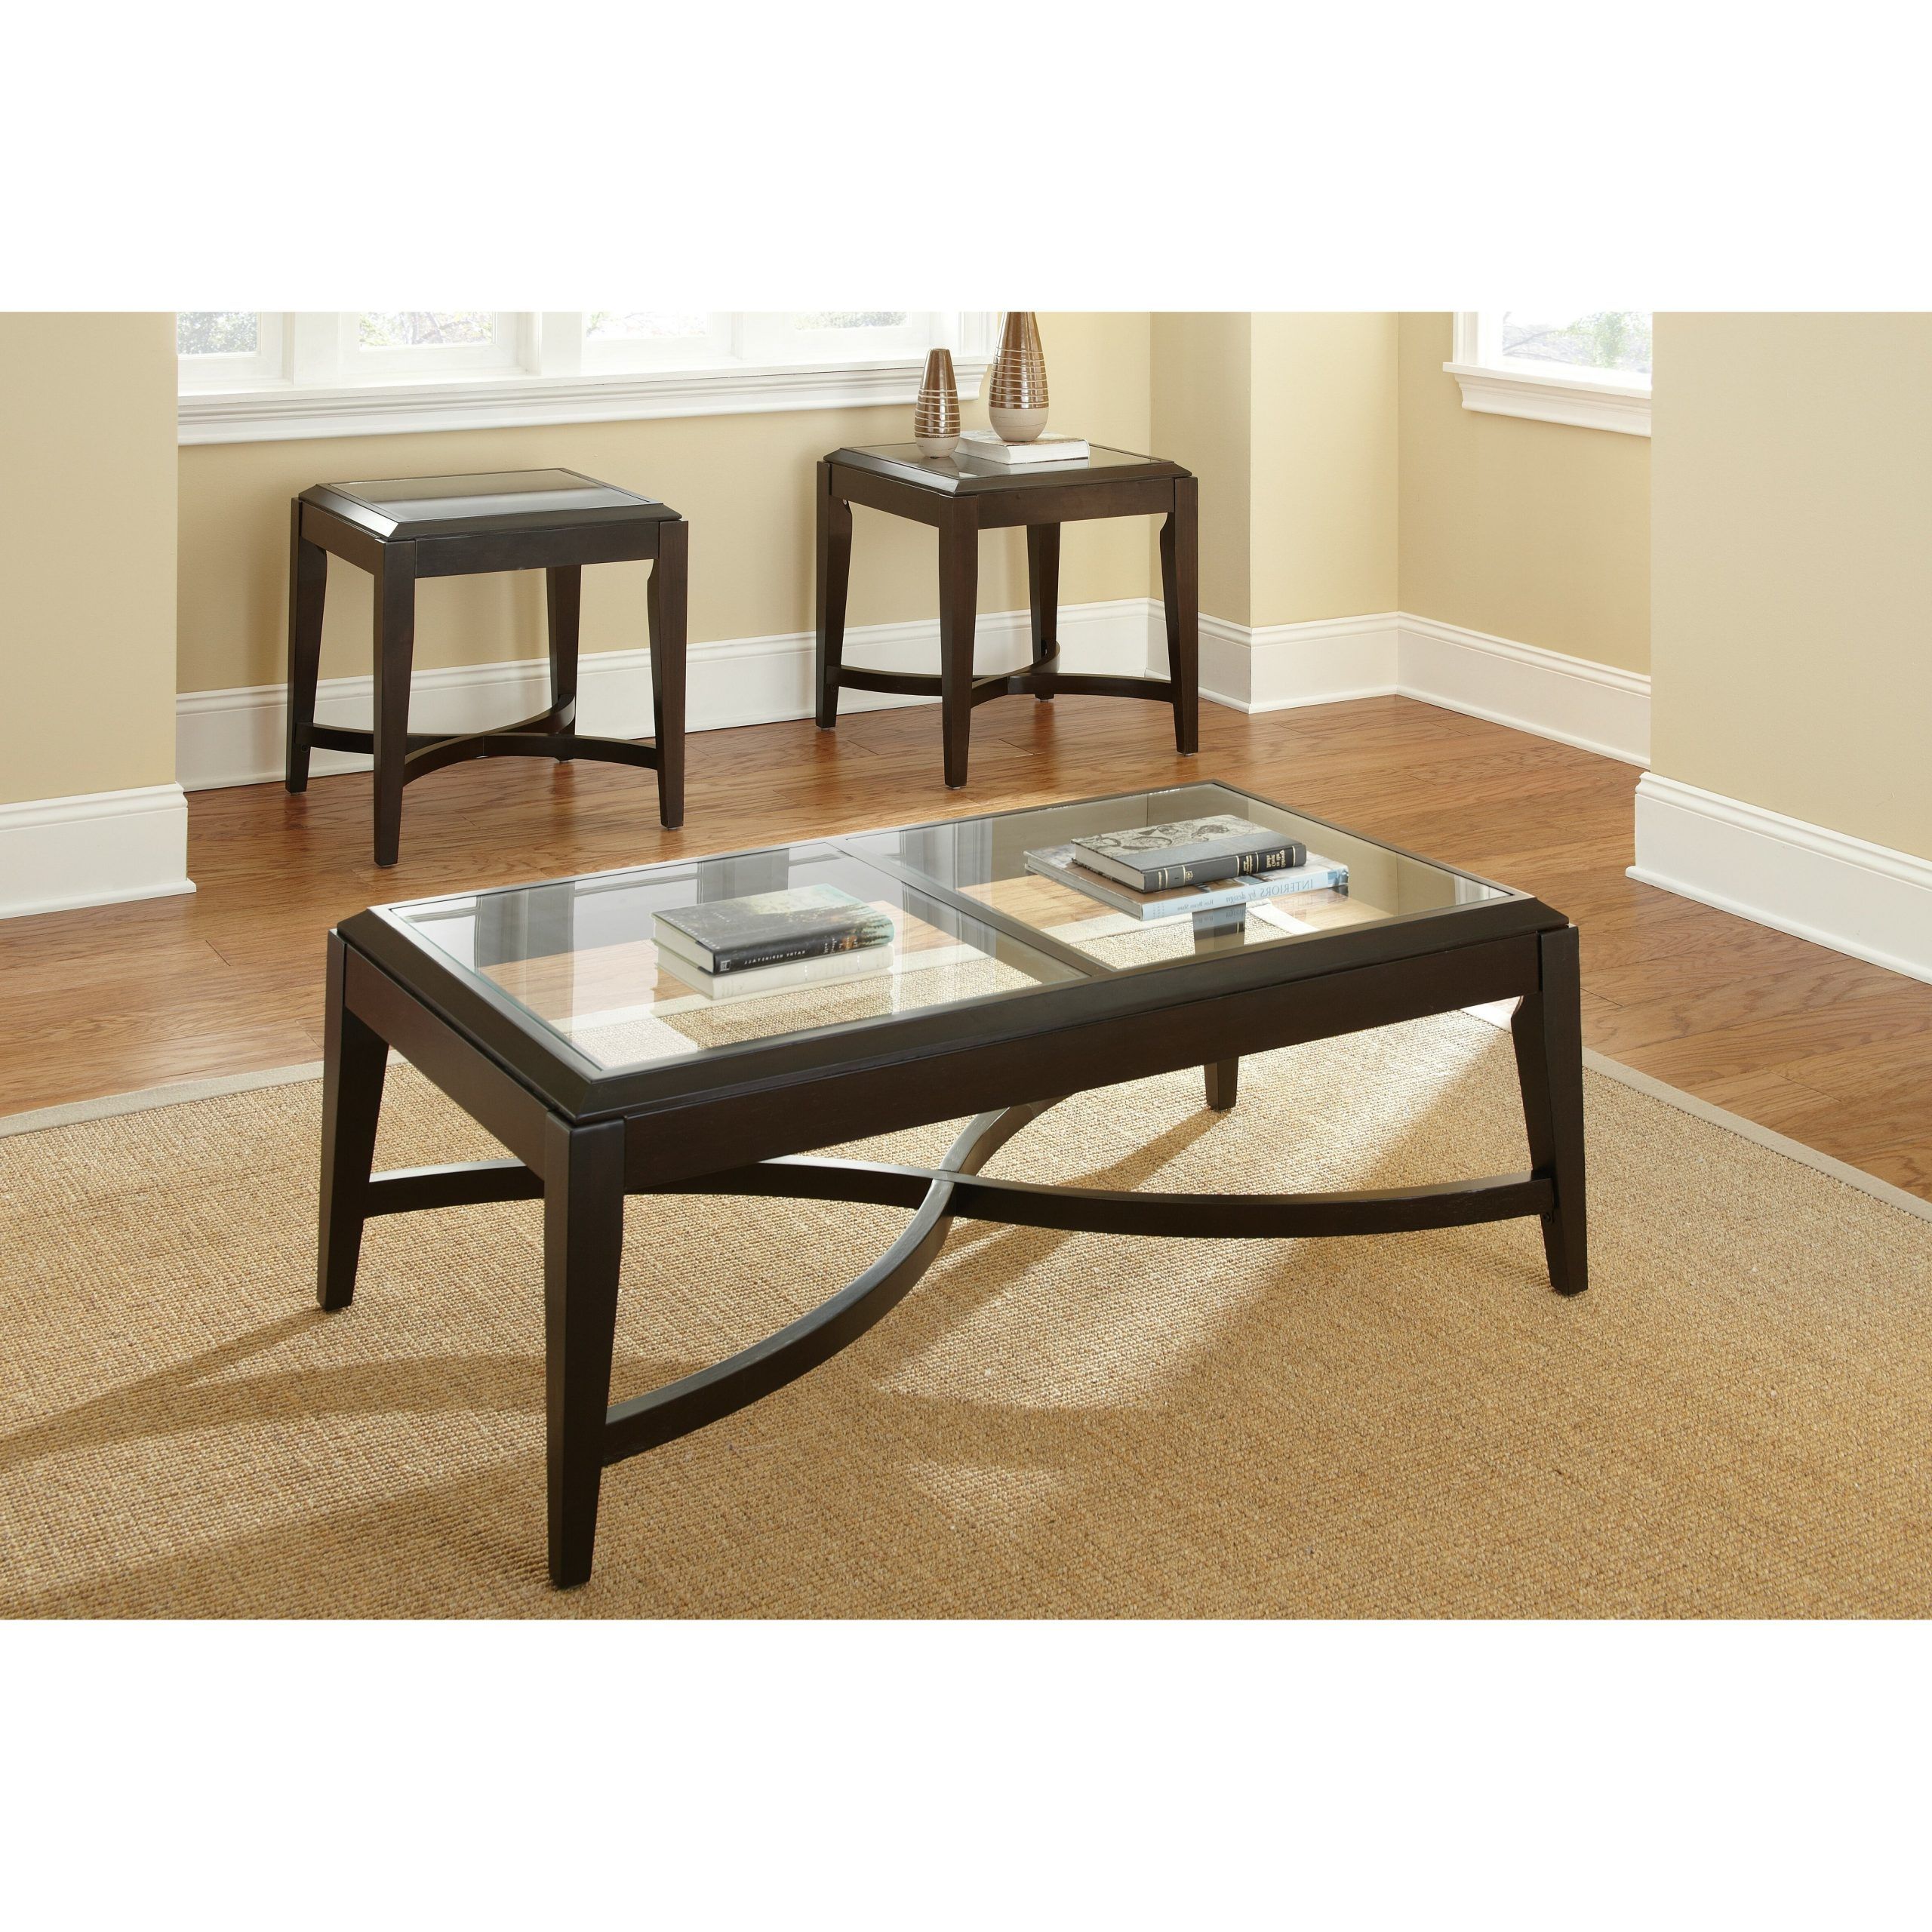 Steve Silver Furniture Mayfield 3 Piece Coffee Table Set In Fashionable Silver Coffee Tables (View 16 of 20)